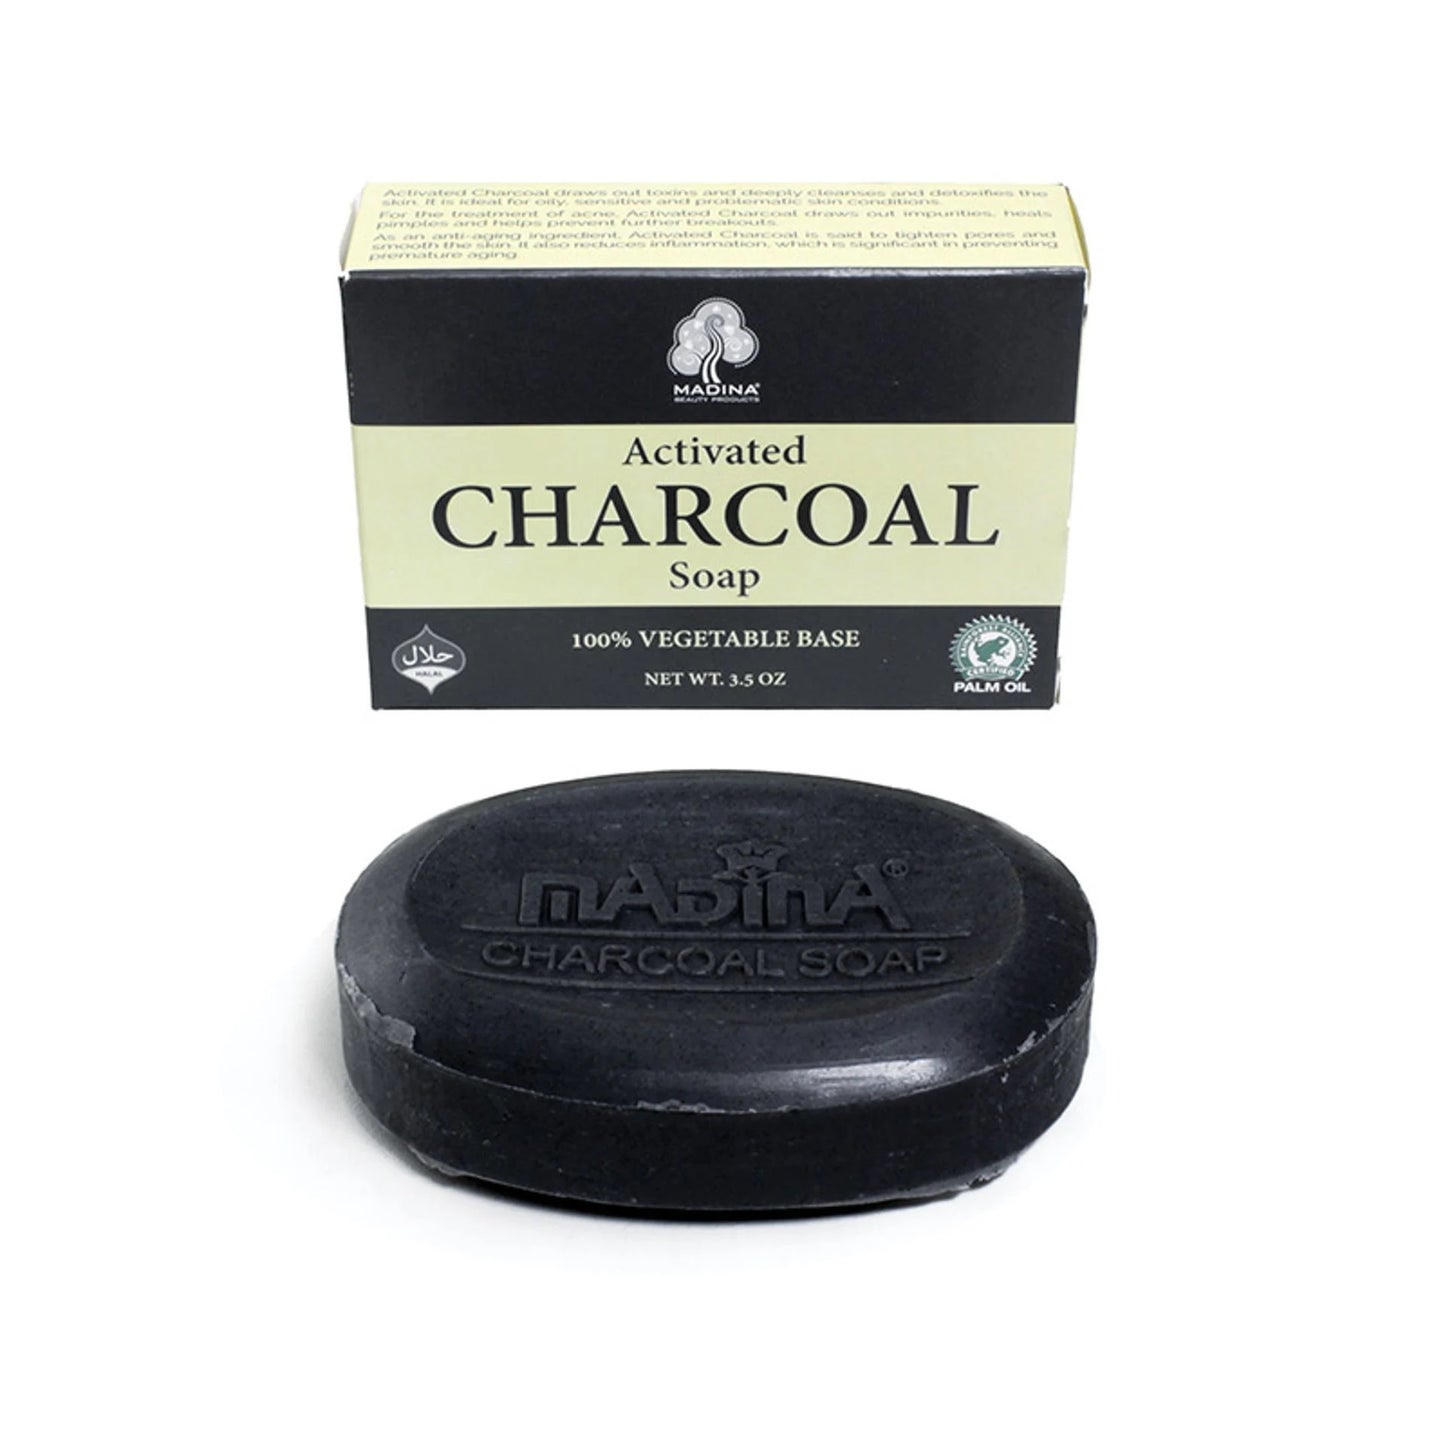 Activated Charcoal Soap - 3½ oz.